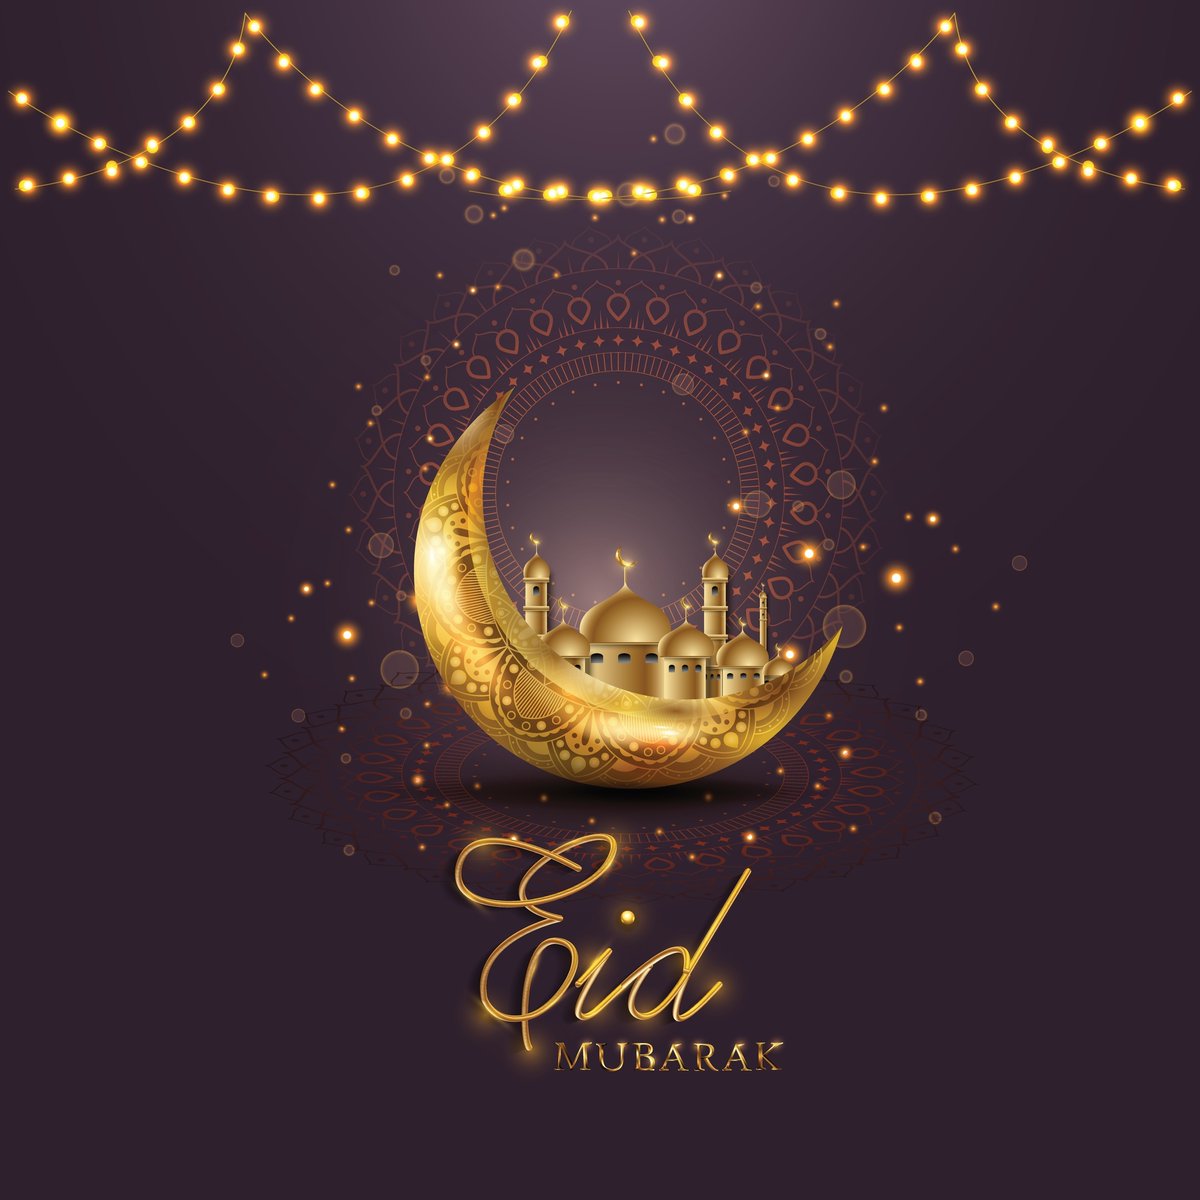 Eid Mubarak to all who celebrate, especially international students who may be far from home. #YouAreWelcomeHere